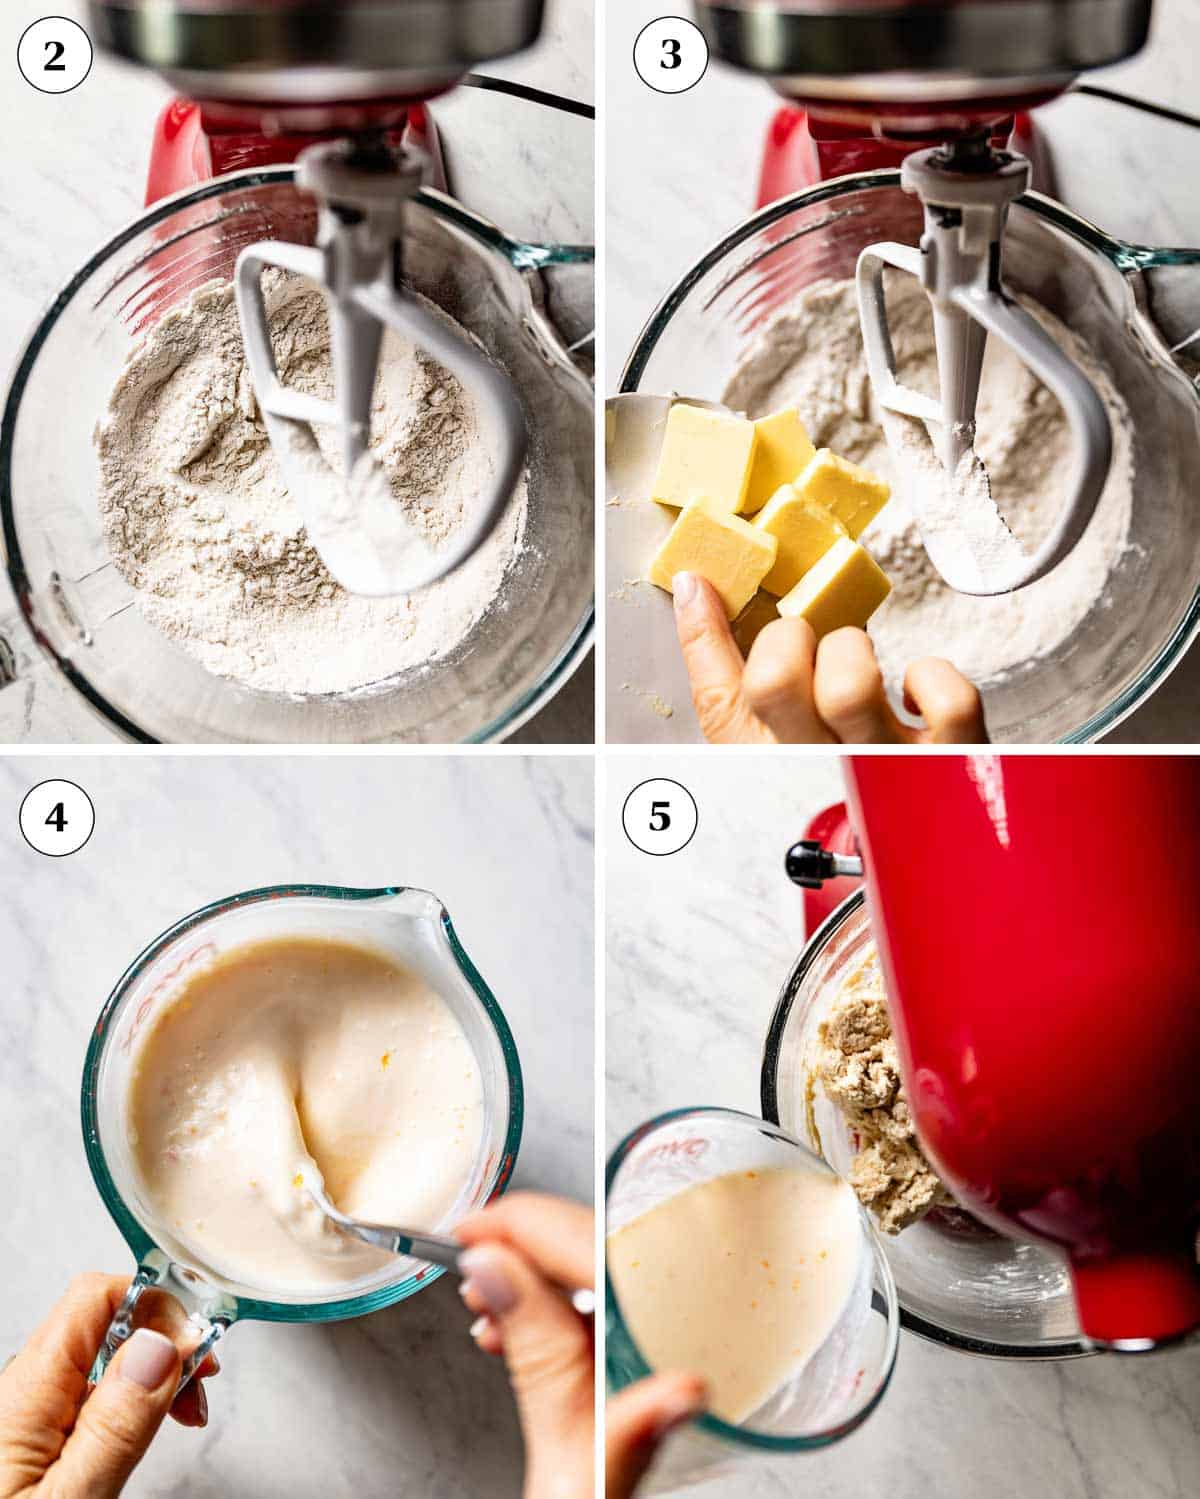 Steps showing how to make the bread dough in a standing mixer.